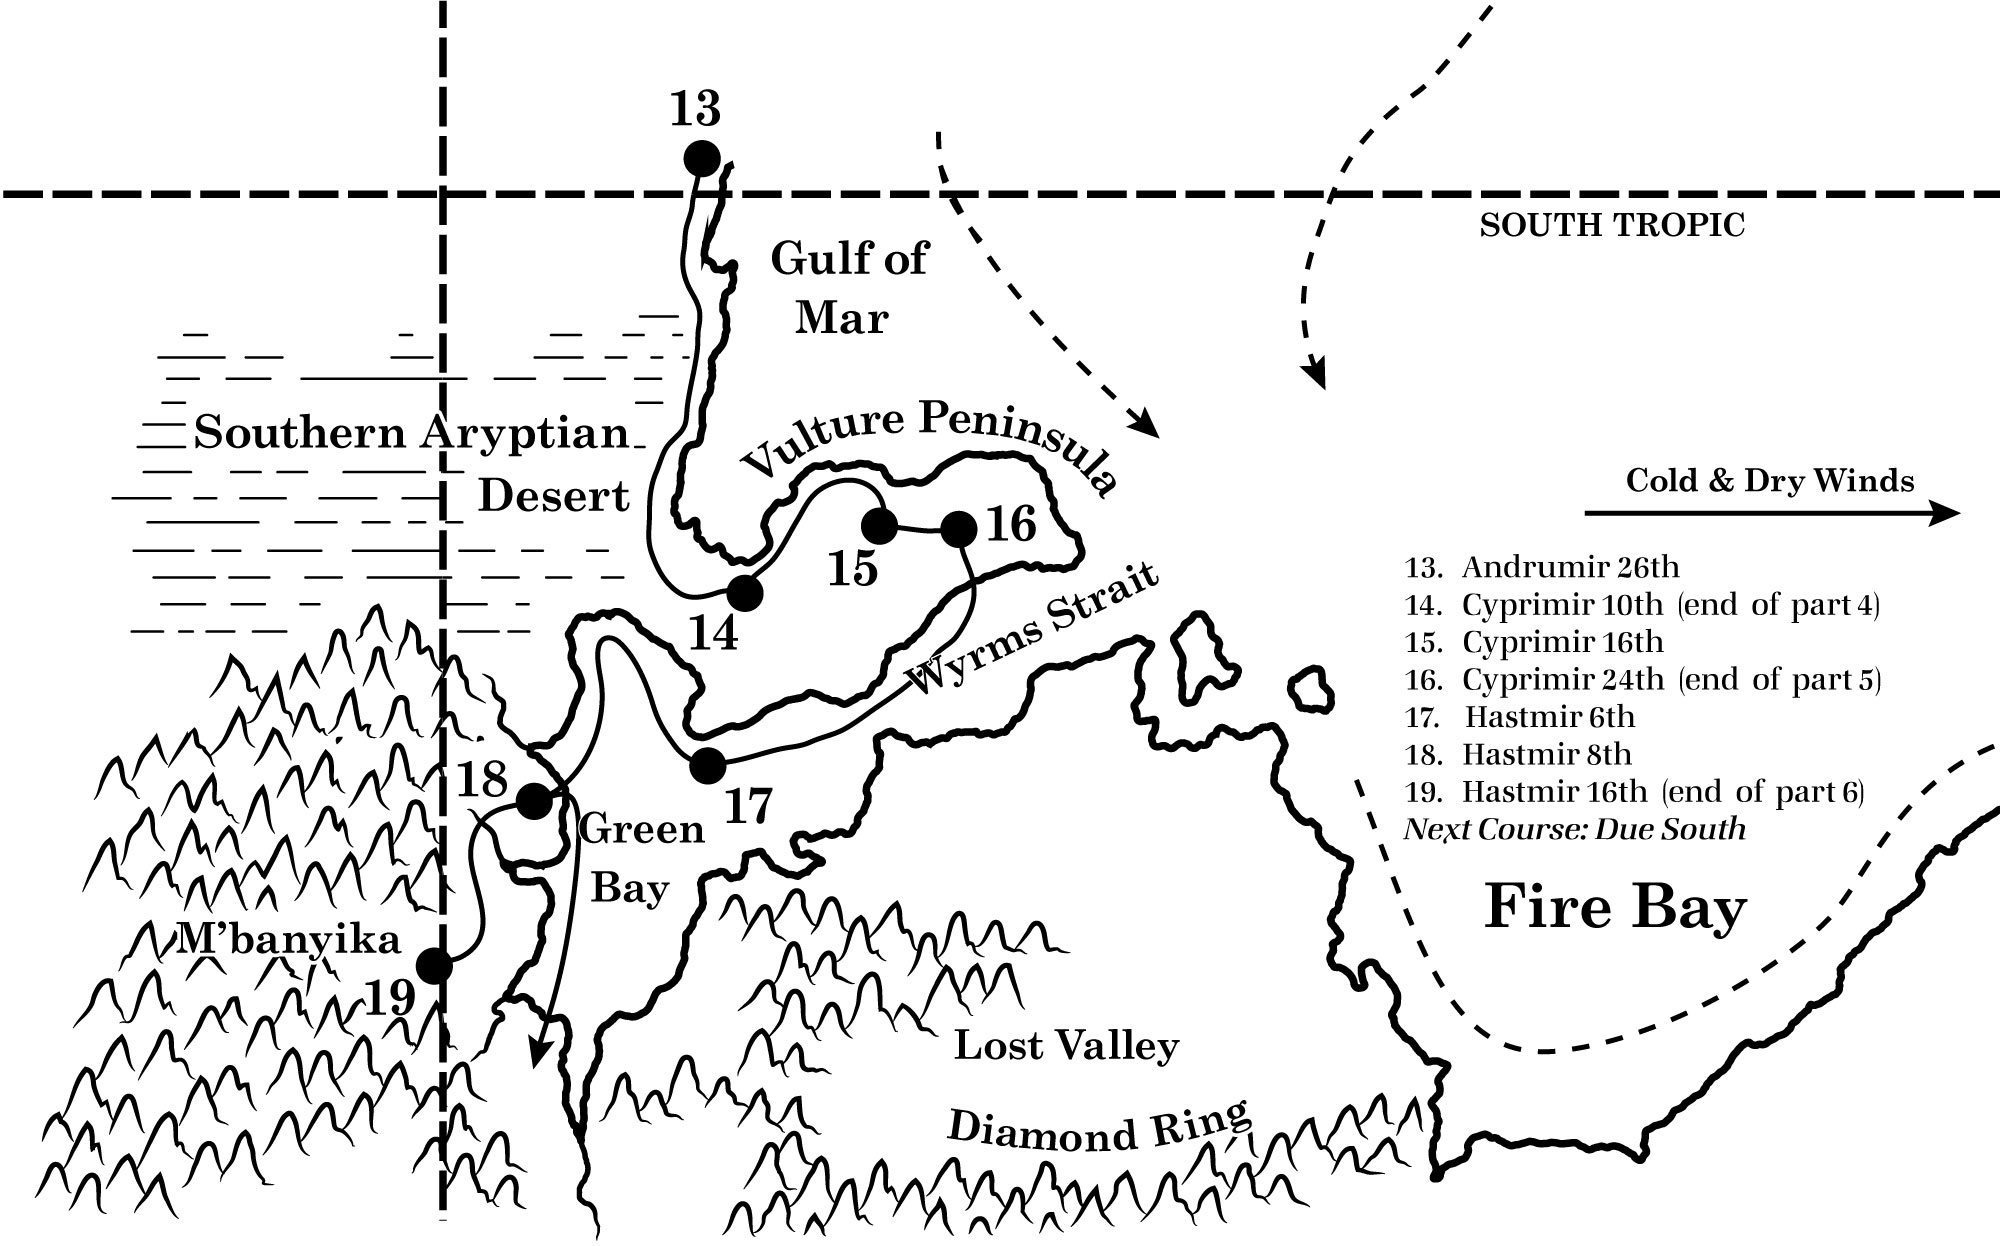 Replica of course map from Voyage of the Princess Ark Part 6, Dragon 158